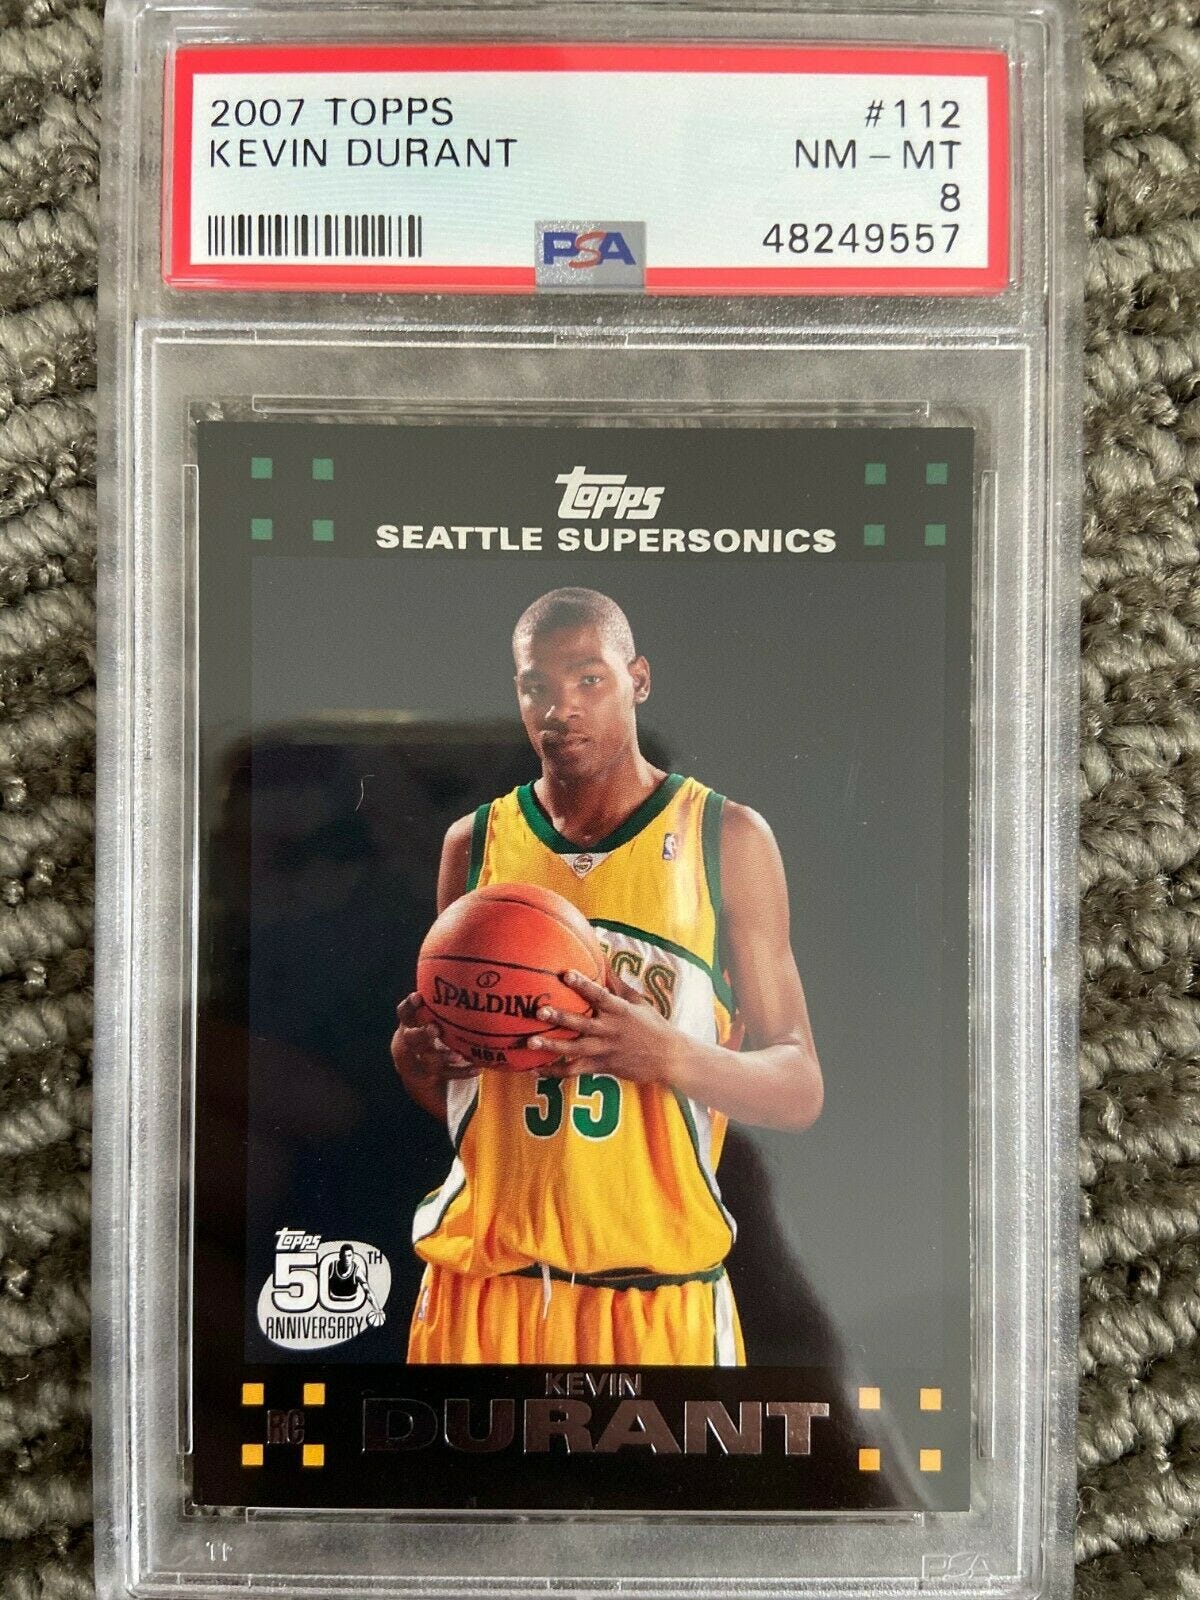 Image 1 - 2007 Topps Kevin Durant #112 Rookie Card PSA 8 NM-MT